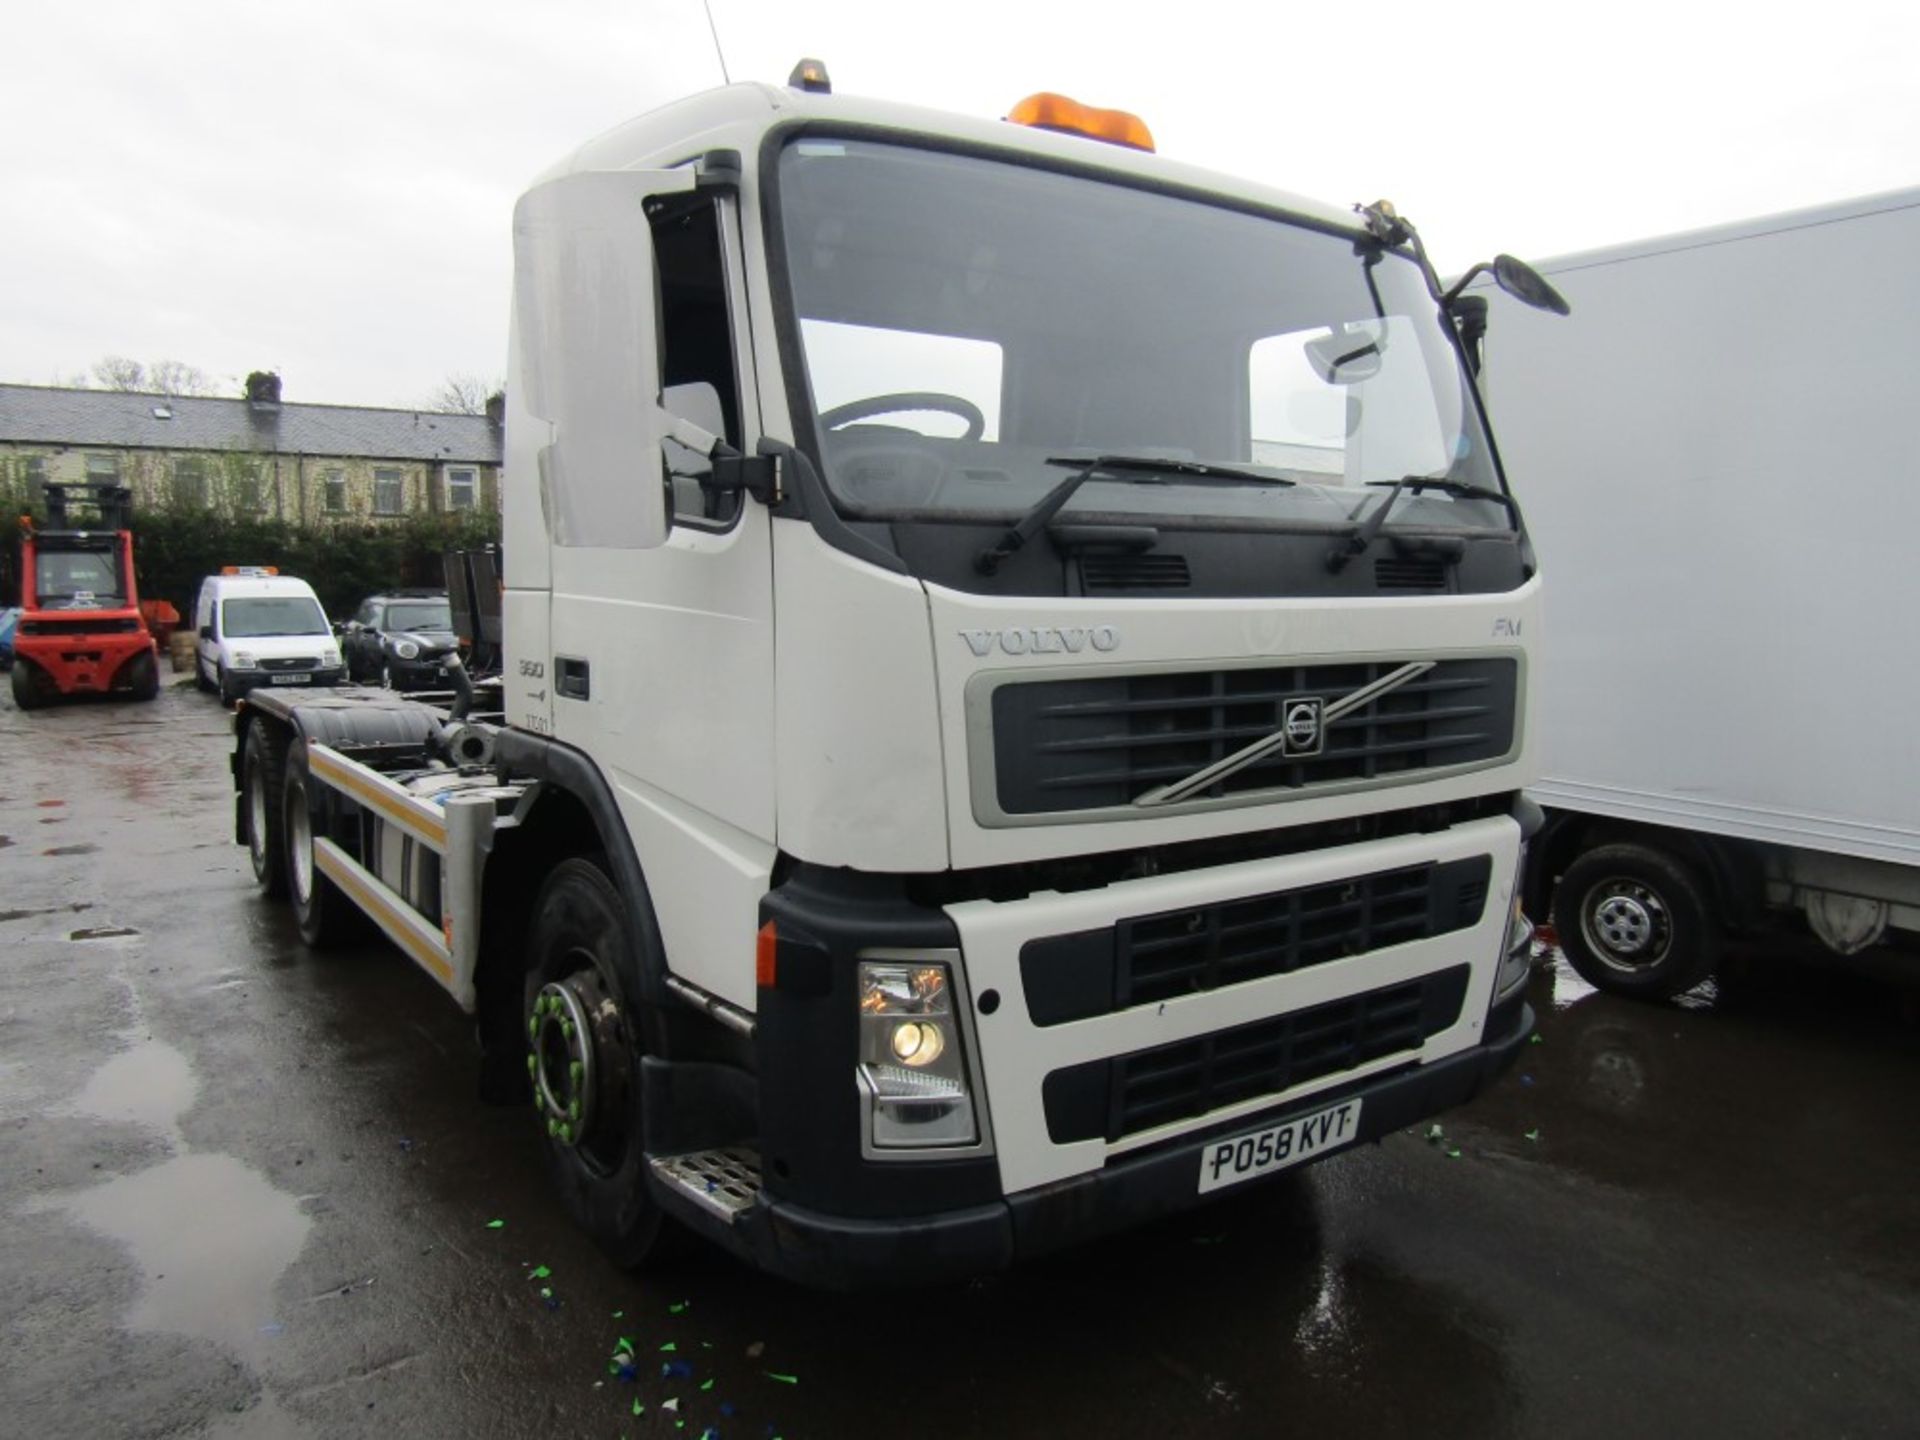 58 reg VOLVO FM-360 CHASSIS CAB (DIRECT UNITED UTILITIES WATER) 1ST REG 02/09, TEST 30/04/22,